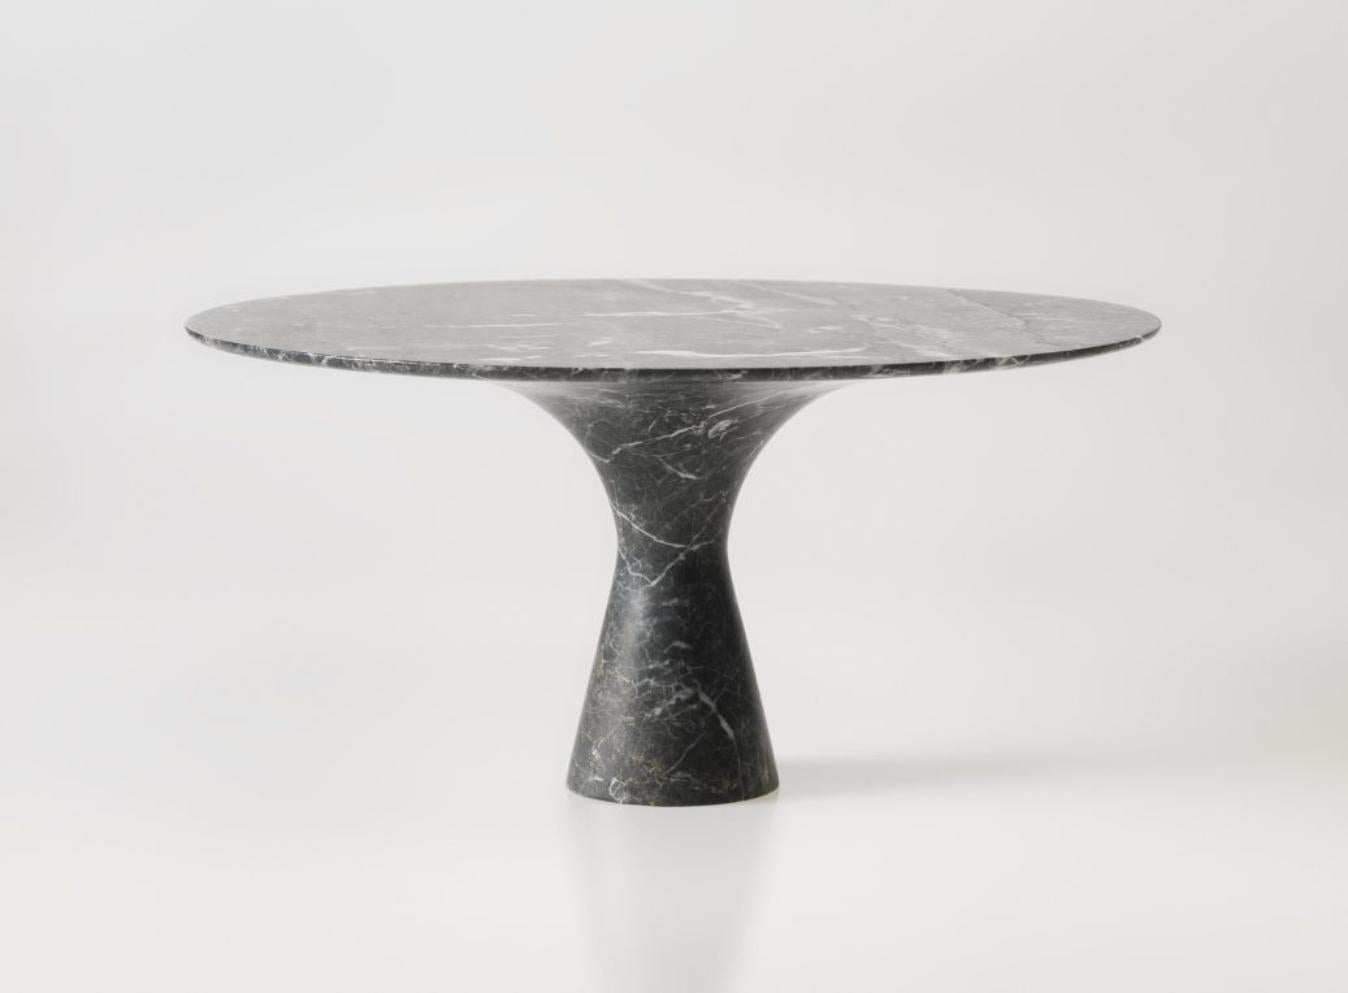 Italian Travertino Silver 2 Refined Contemporary Marble Dining Table 180/75 For Sale